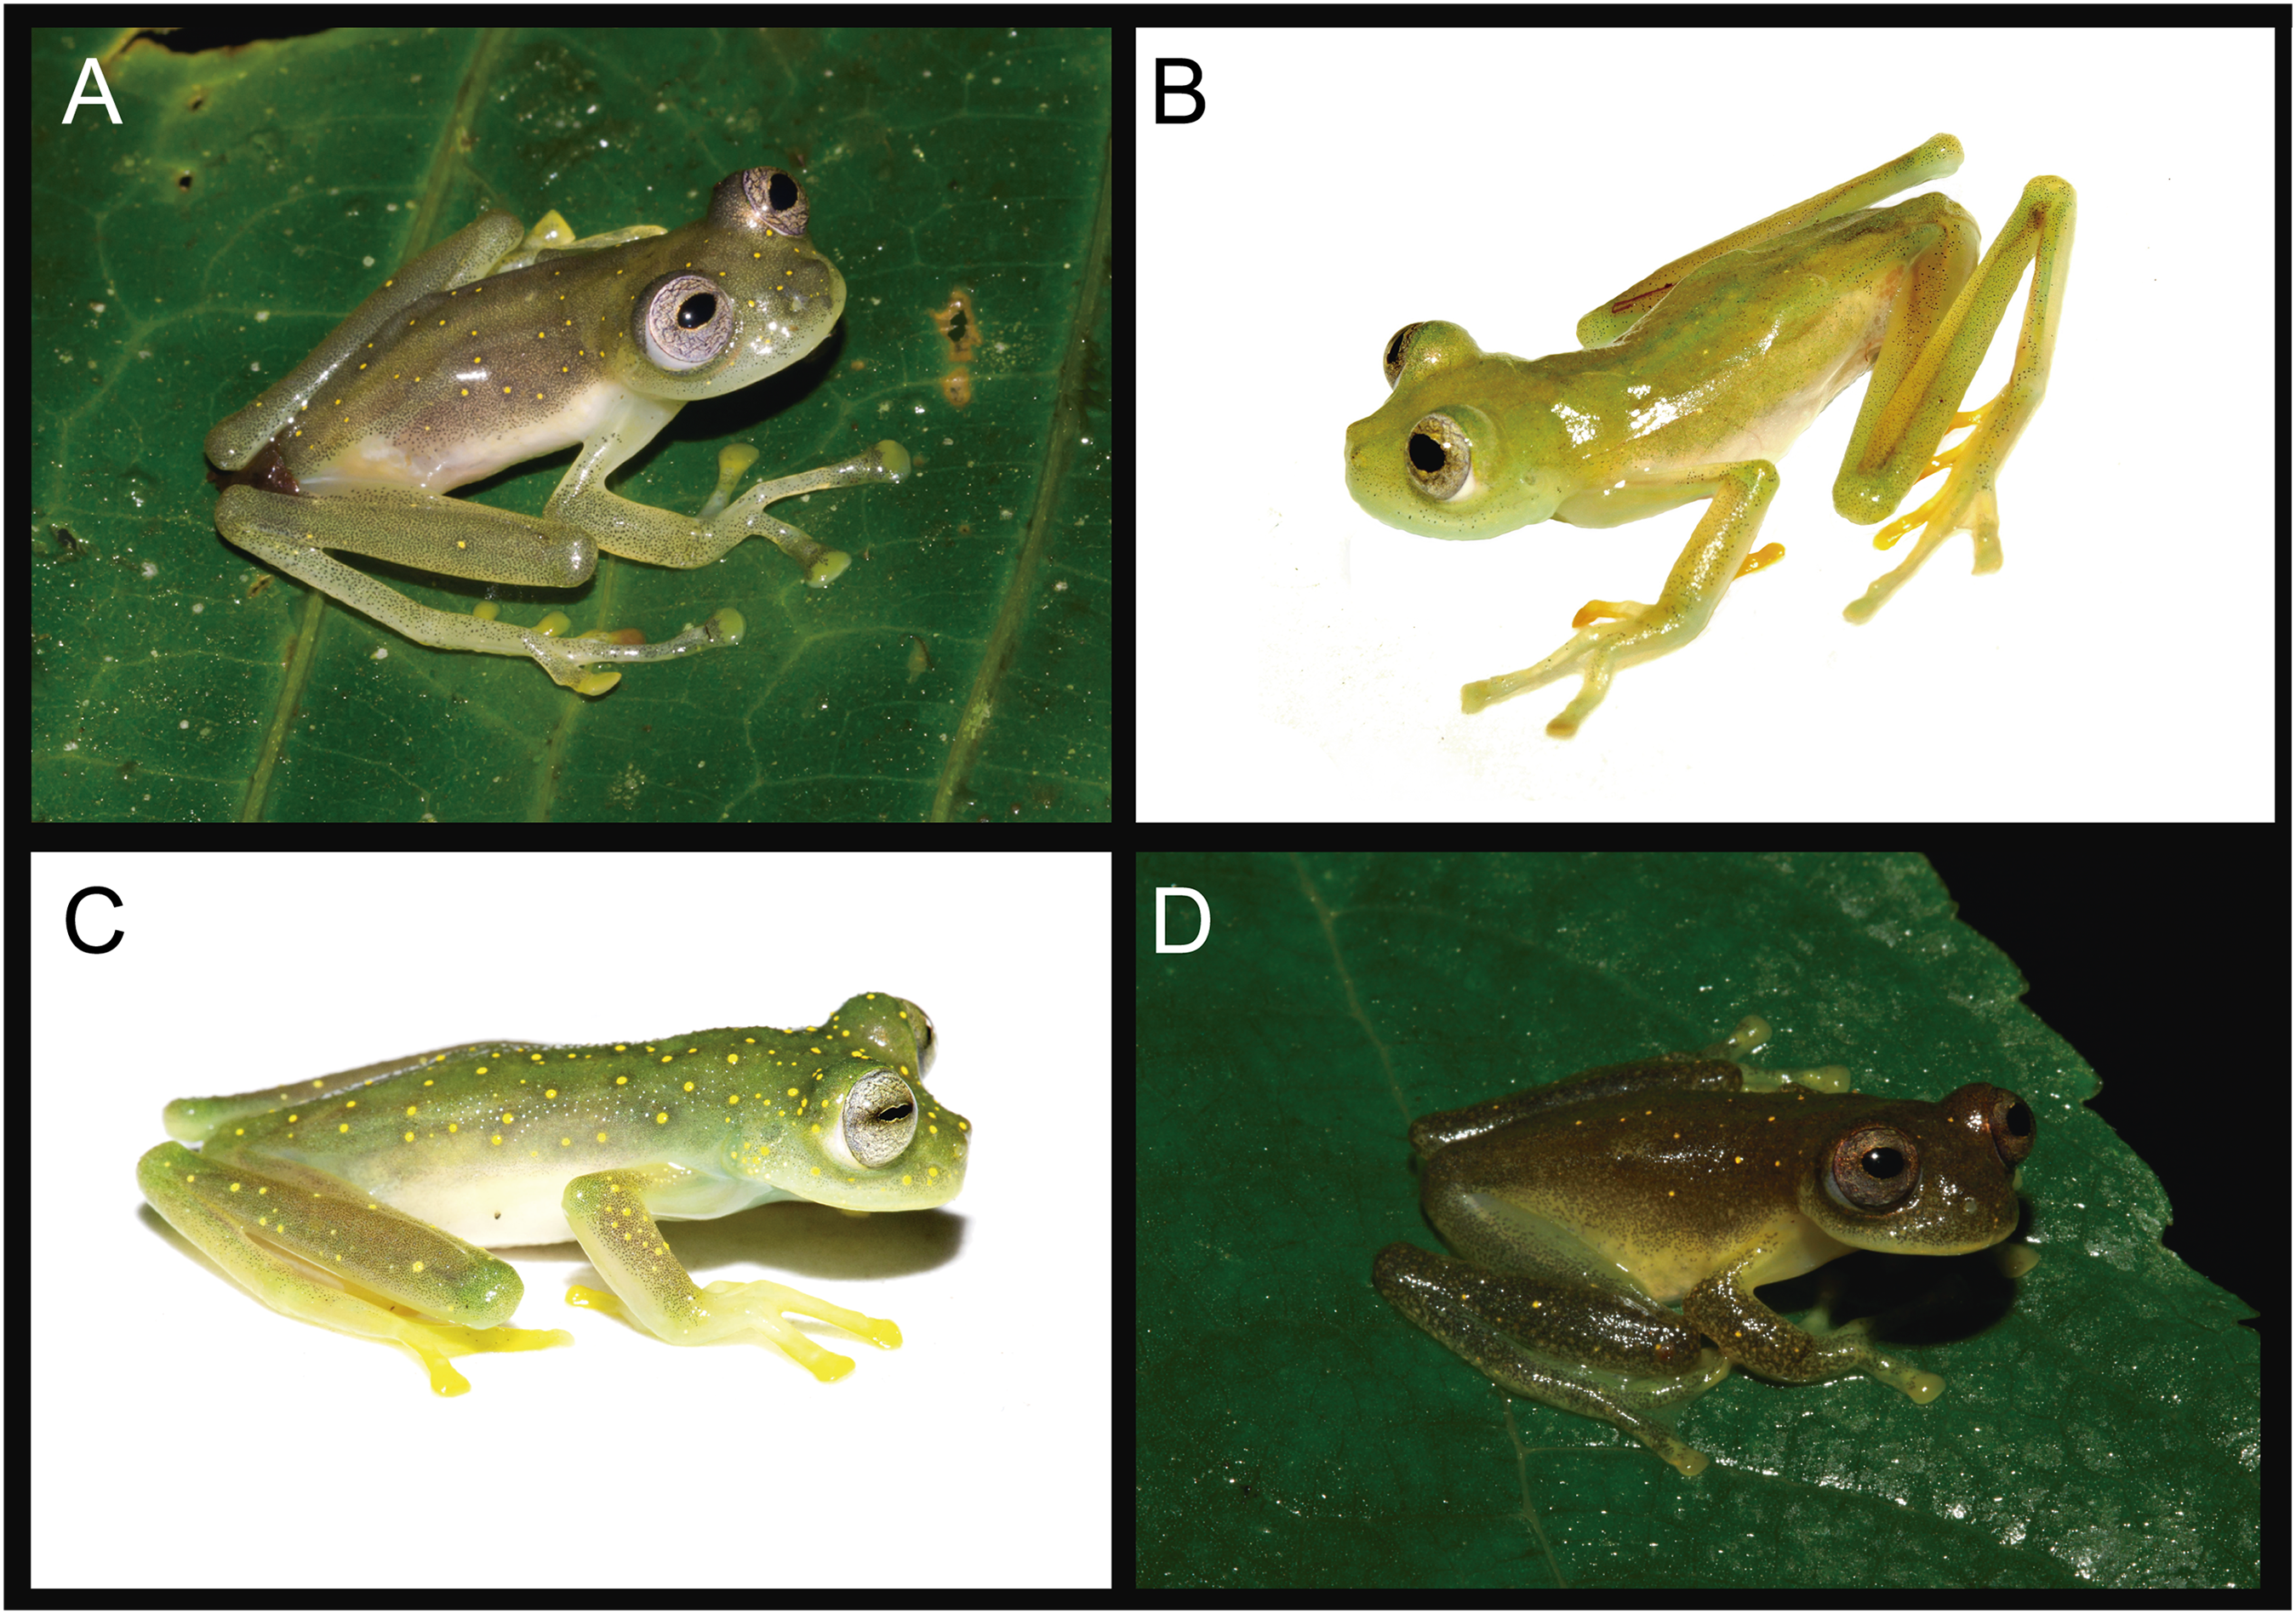 A New Glassfrog Centrolenidae From The Choco Andean Rio